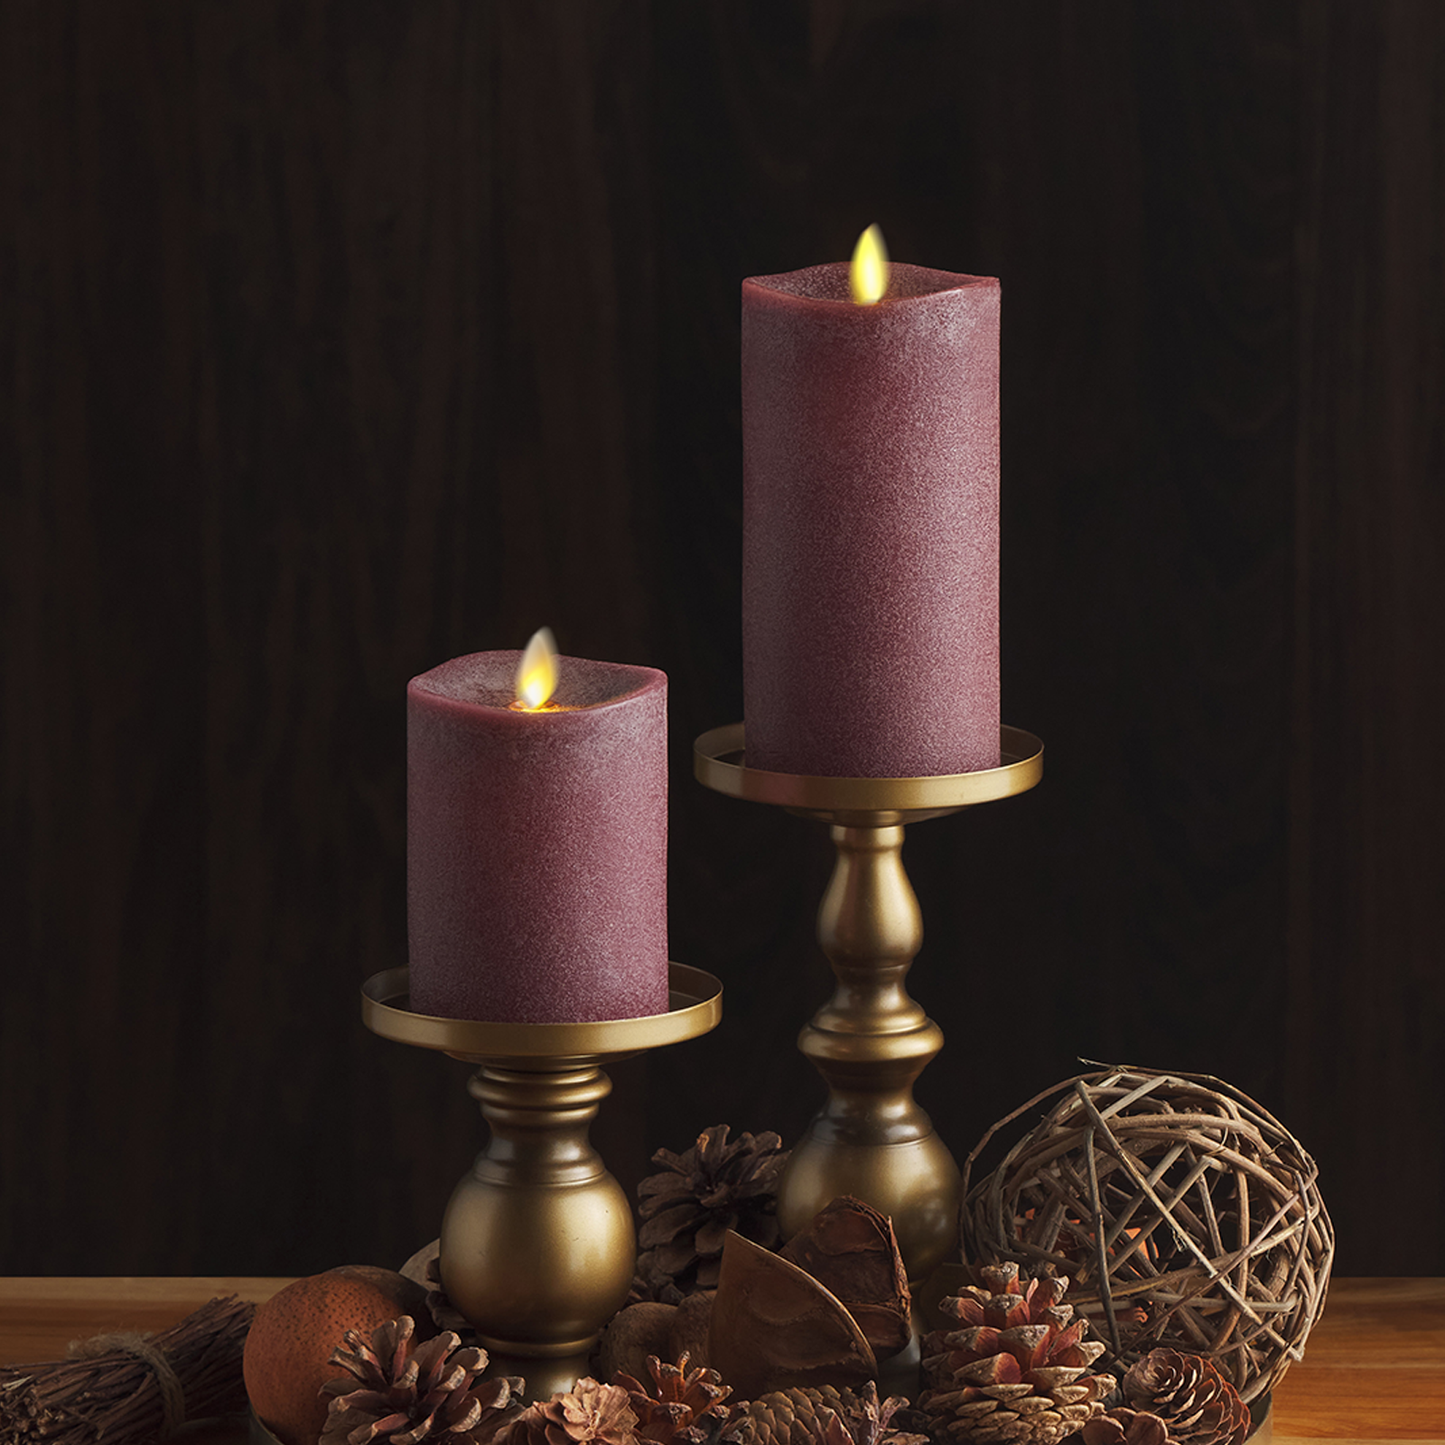 Chalky Raisin Flameless Melted Candle Pillar